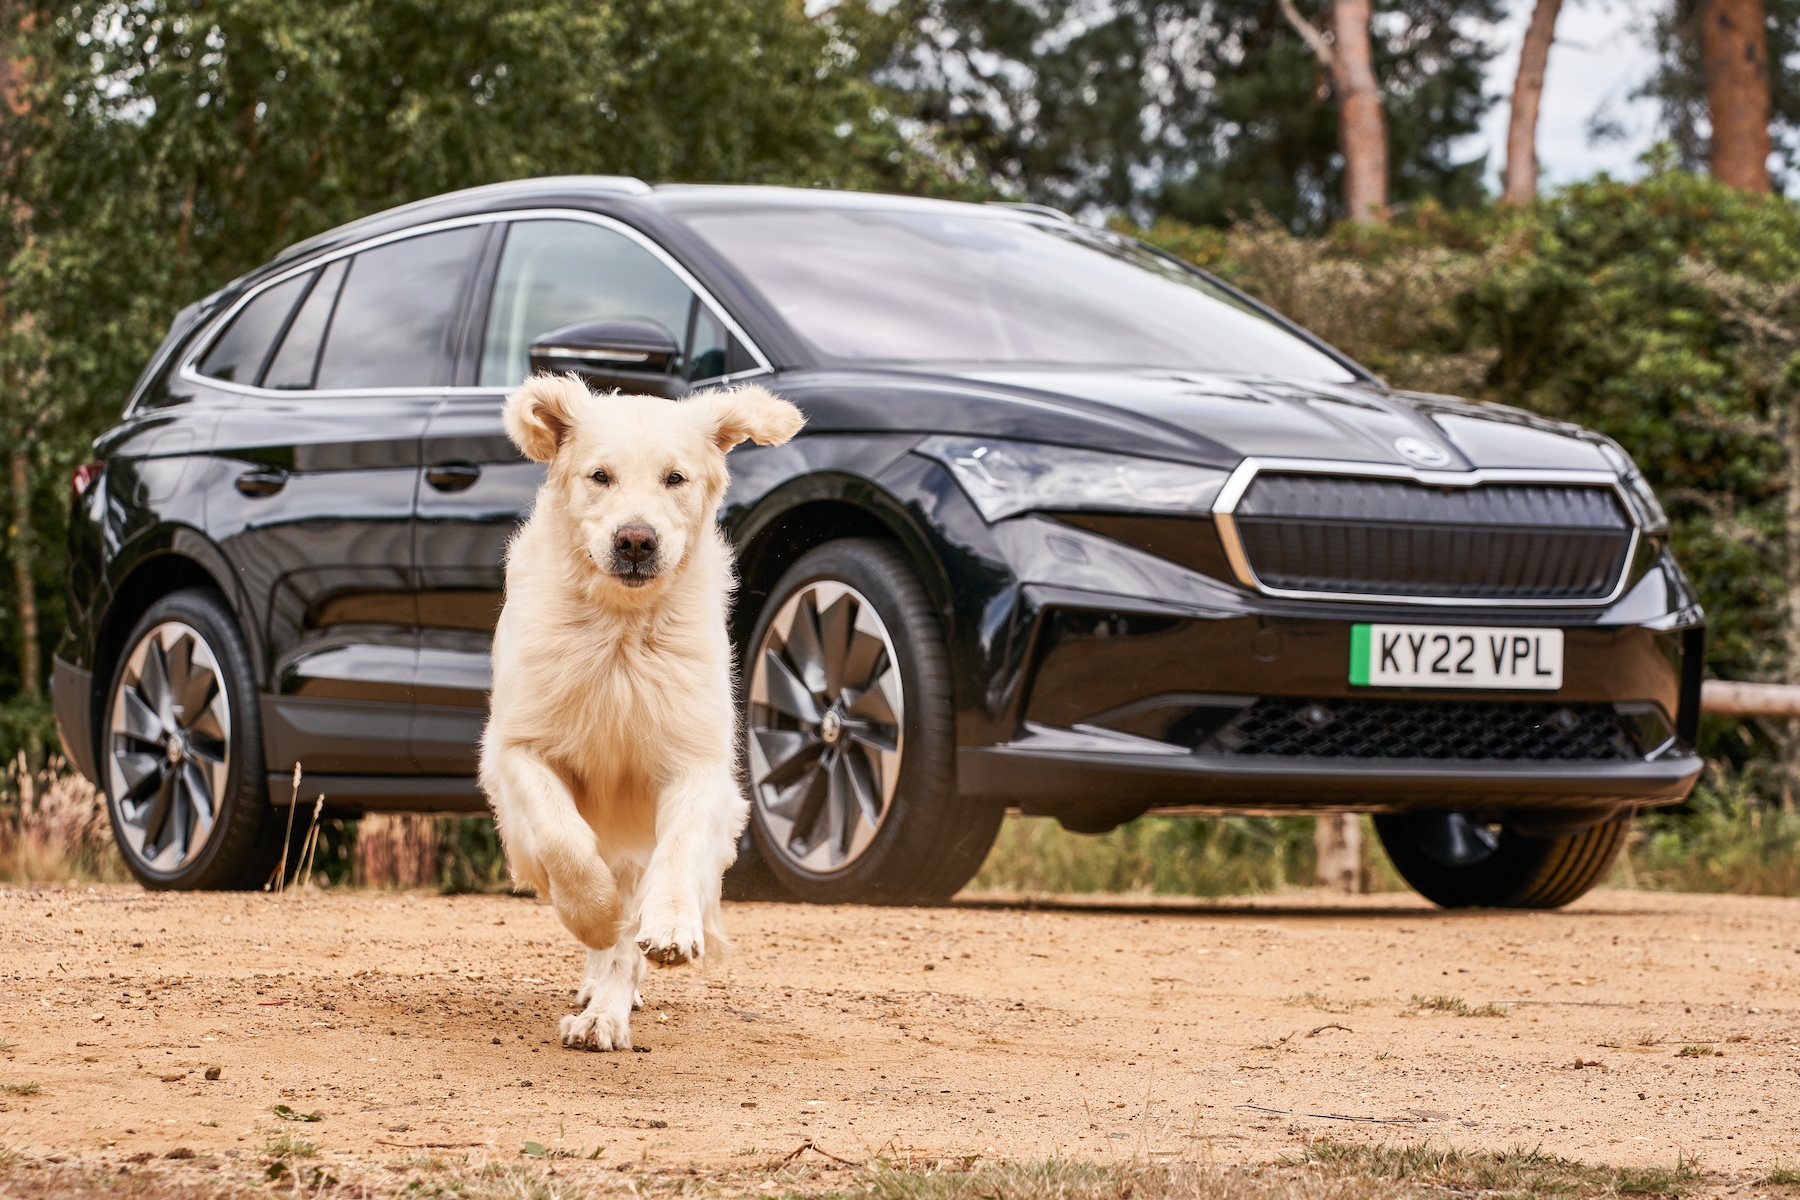 Skoda supporting dogs